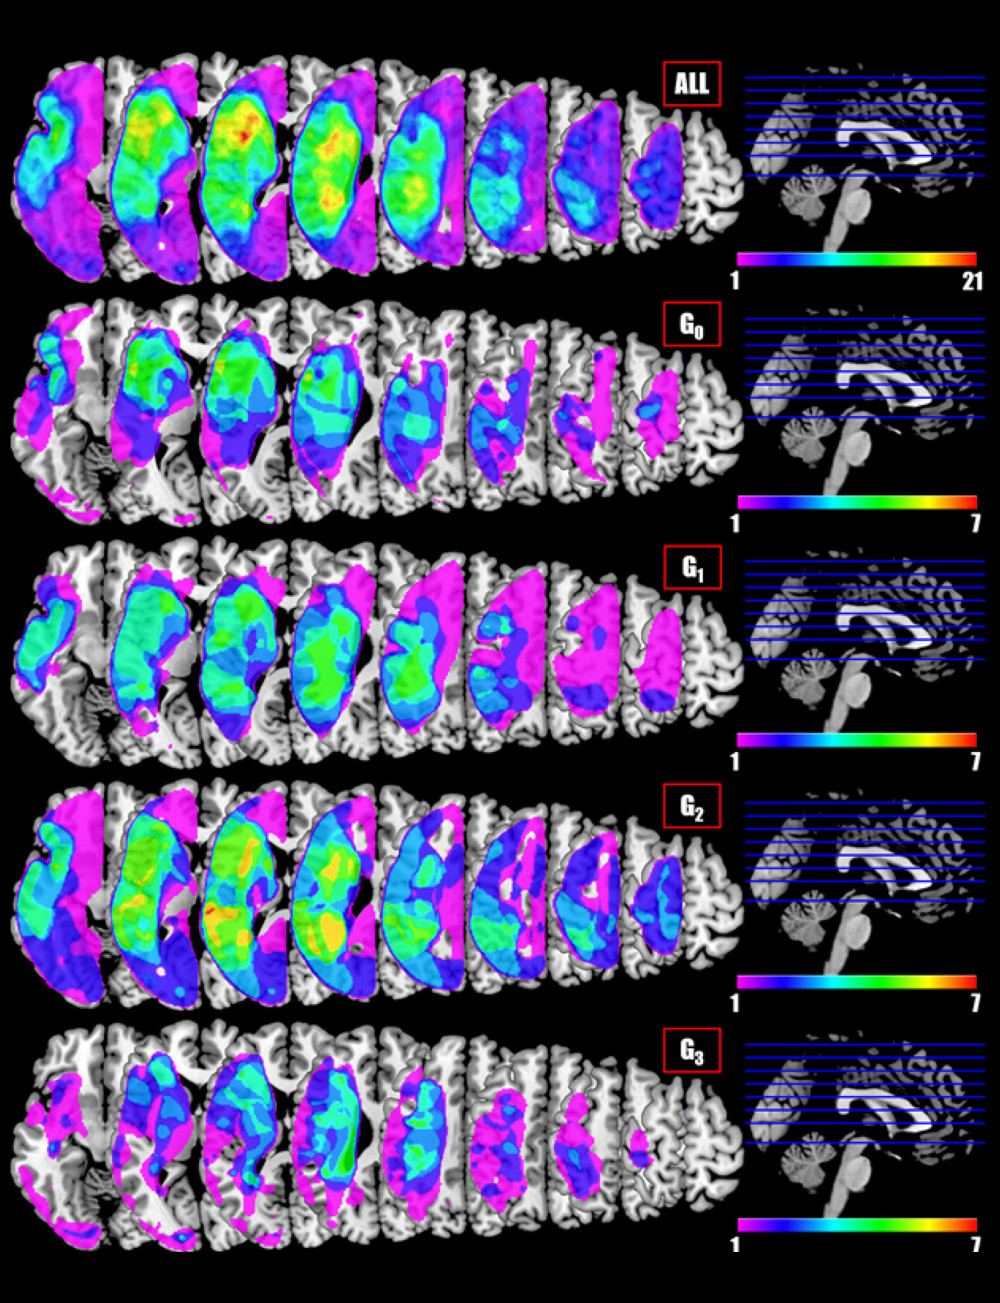 Lesion maps for the 27 included stroke patients. Each voxel value is the number of participants whose stroke lesion extends to that particular voxel (all pictures in neurological convention – left in the figure corresponds to left in the brain). Top lesion map depicts all participants together, then divided by groups.